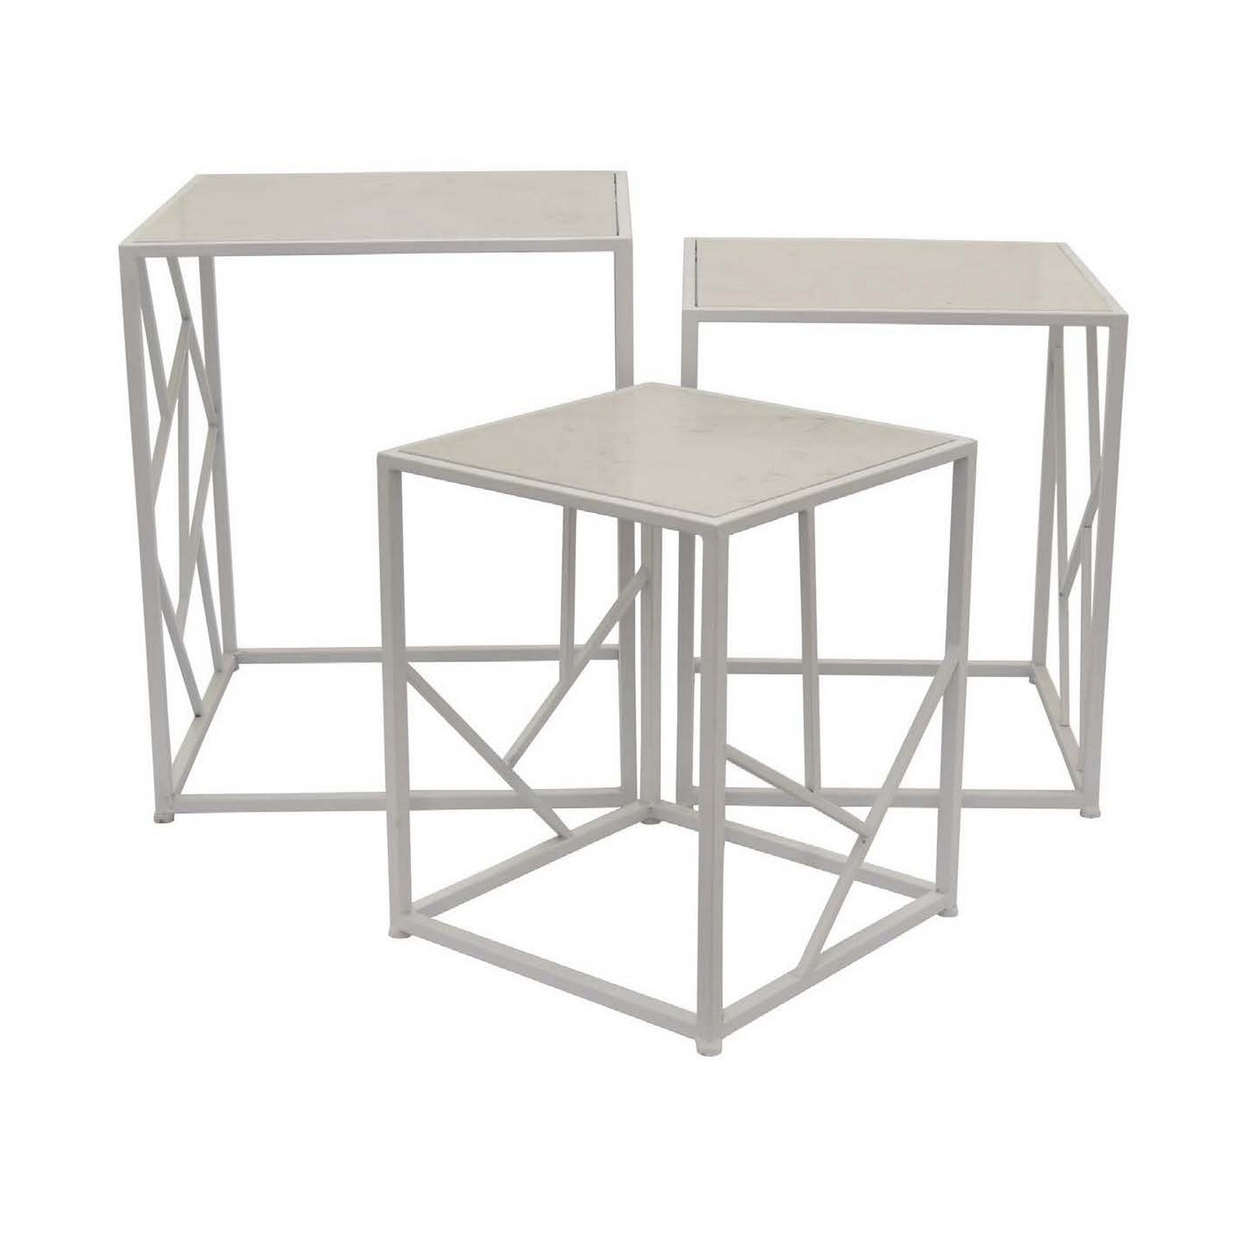 Laury 24 Inch Plant Stand Table Set Of 3, Square, Metal, White Finish -Saltoro Sherpi